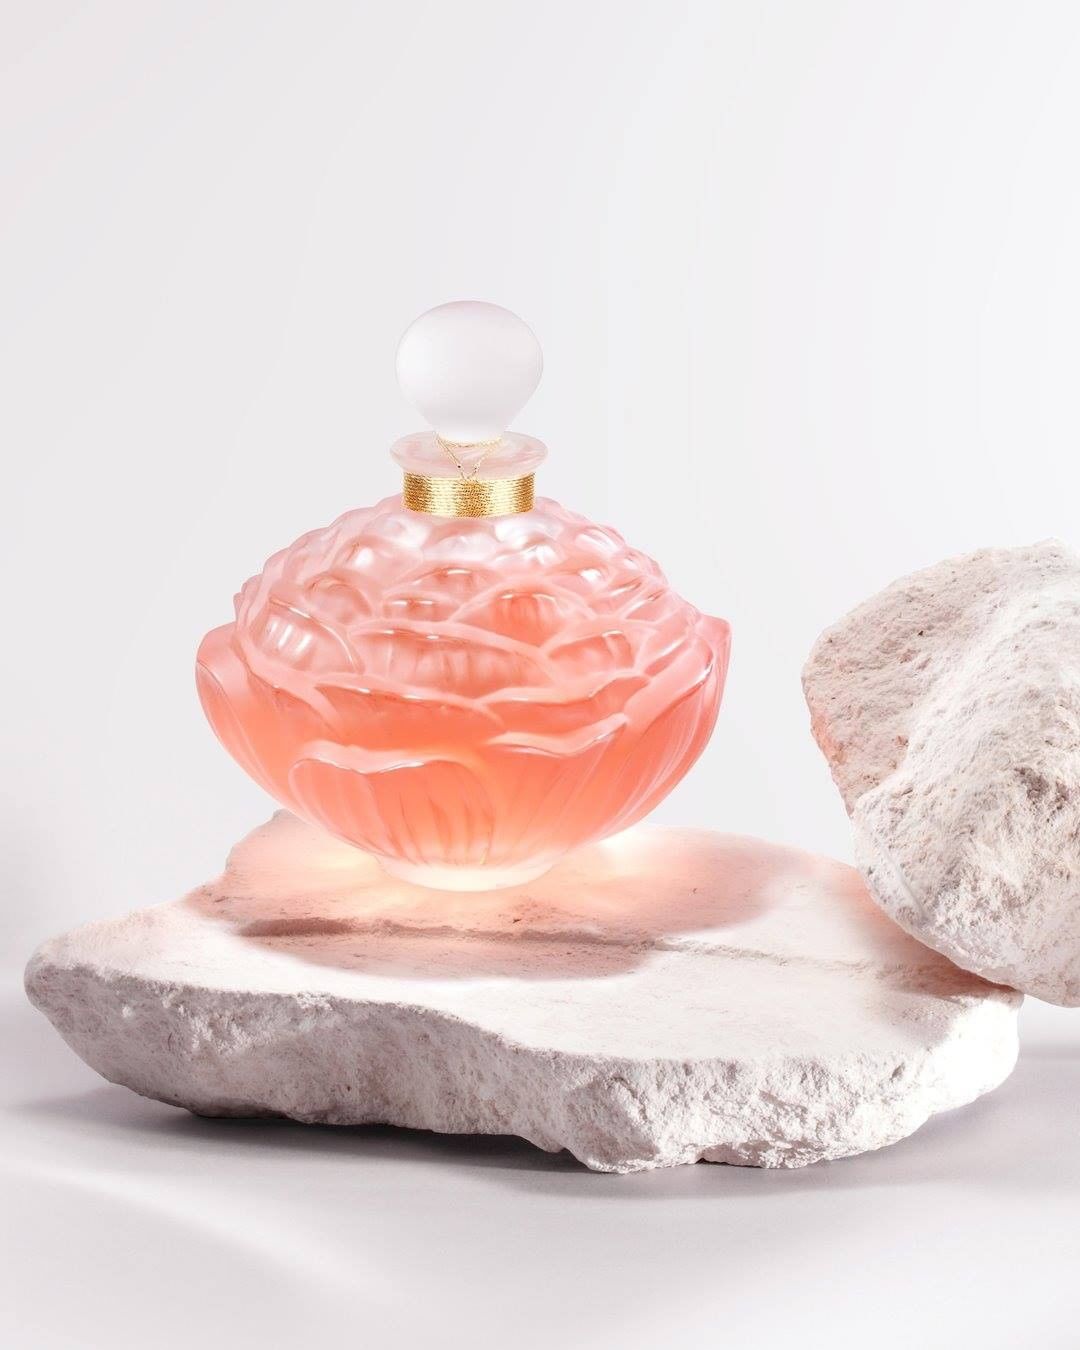 LALIQUE - As the dew-drop stopper is lifted, a lush floral fragrance emerges from the blooming crystal “Pivoine” flacon. The three most precious essences of the perfumer’s palette express the luxurian...